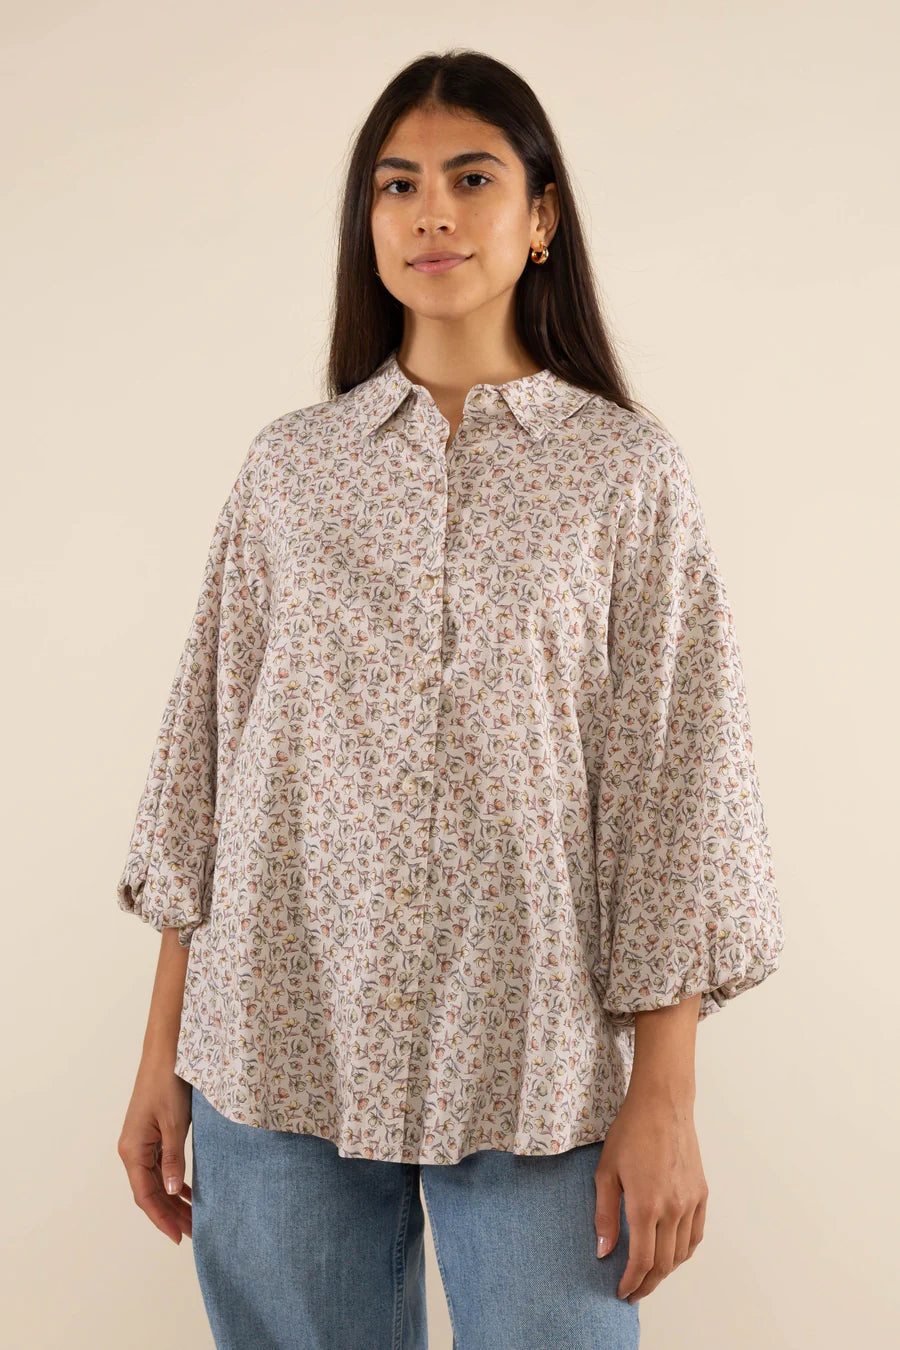 Joanie Button Down Blouse General Not specified 